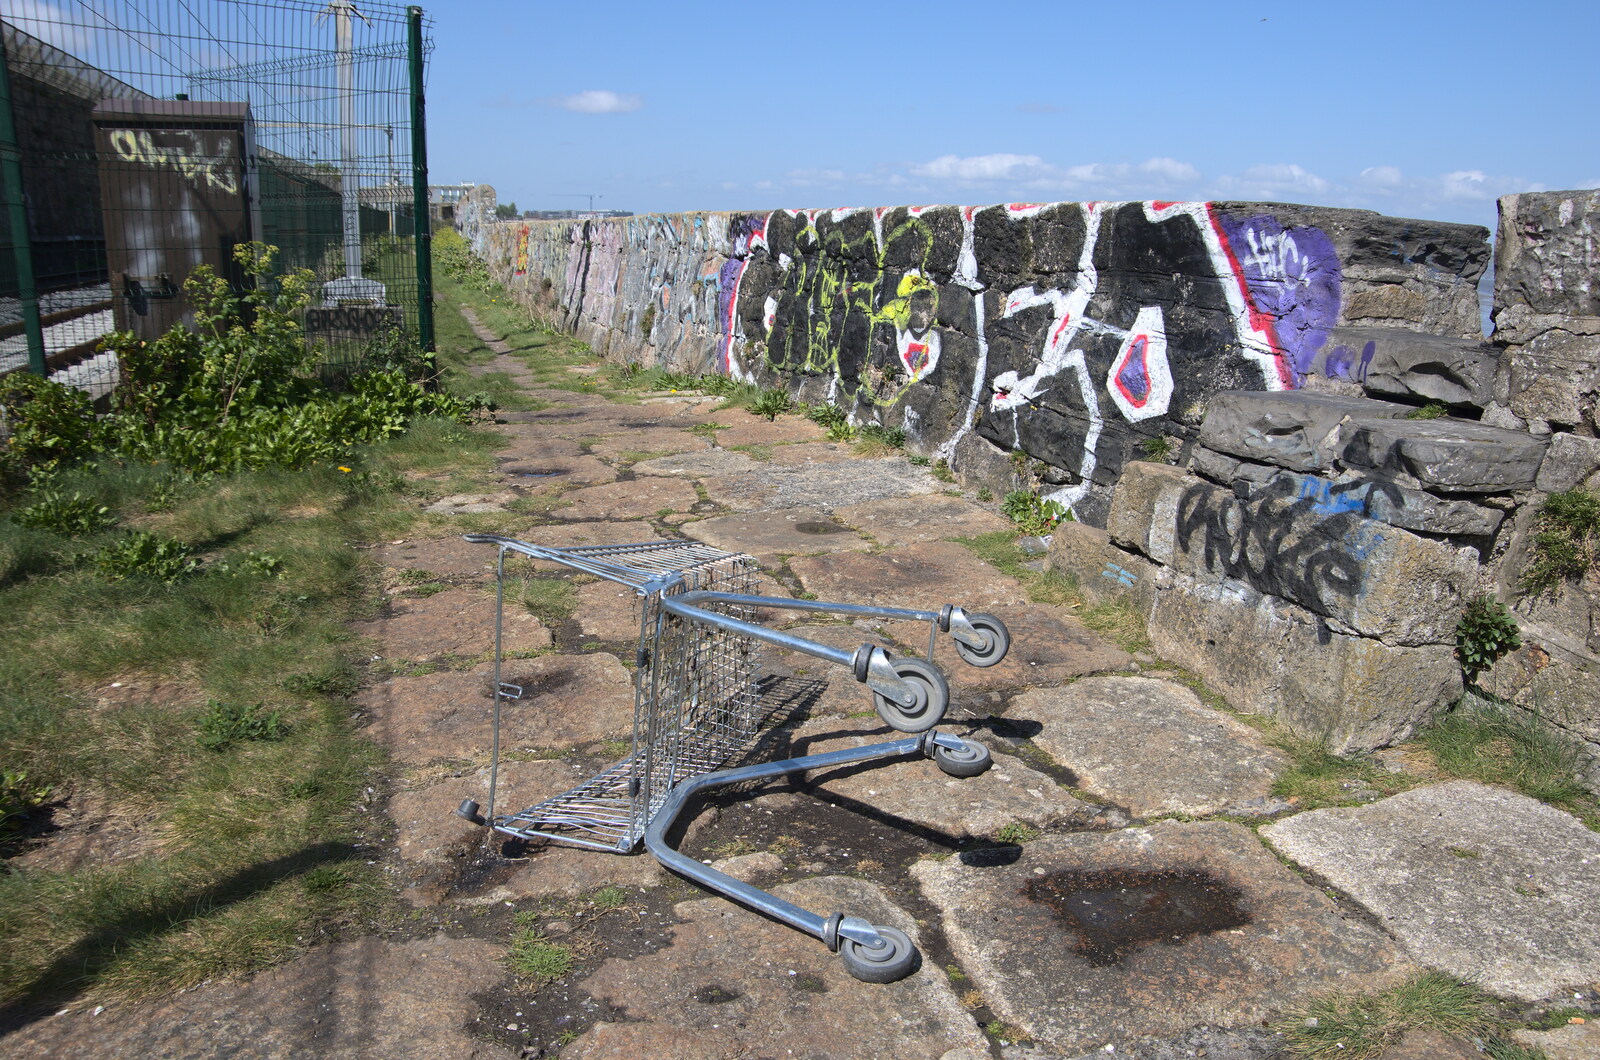 Blackrock North and South, Louth and County Dublin, Ireland - 23rd April 2022: A little shopping trolley is abandoned